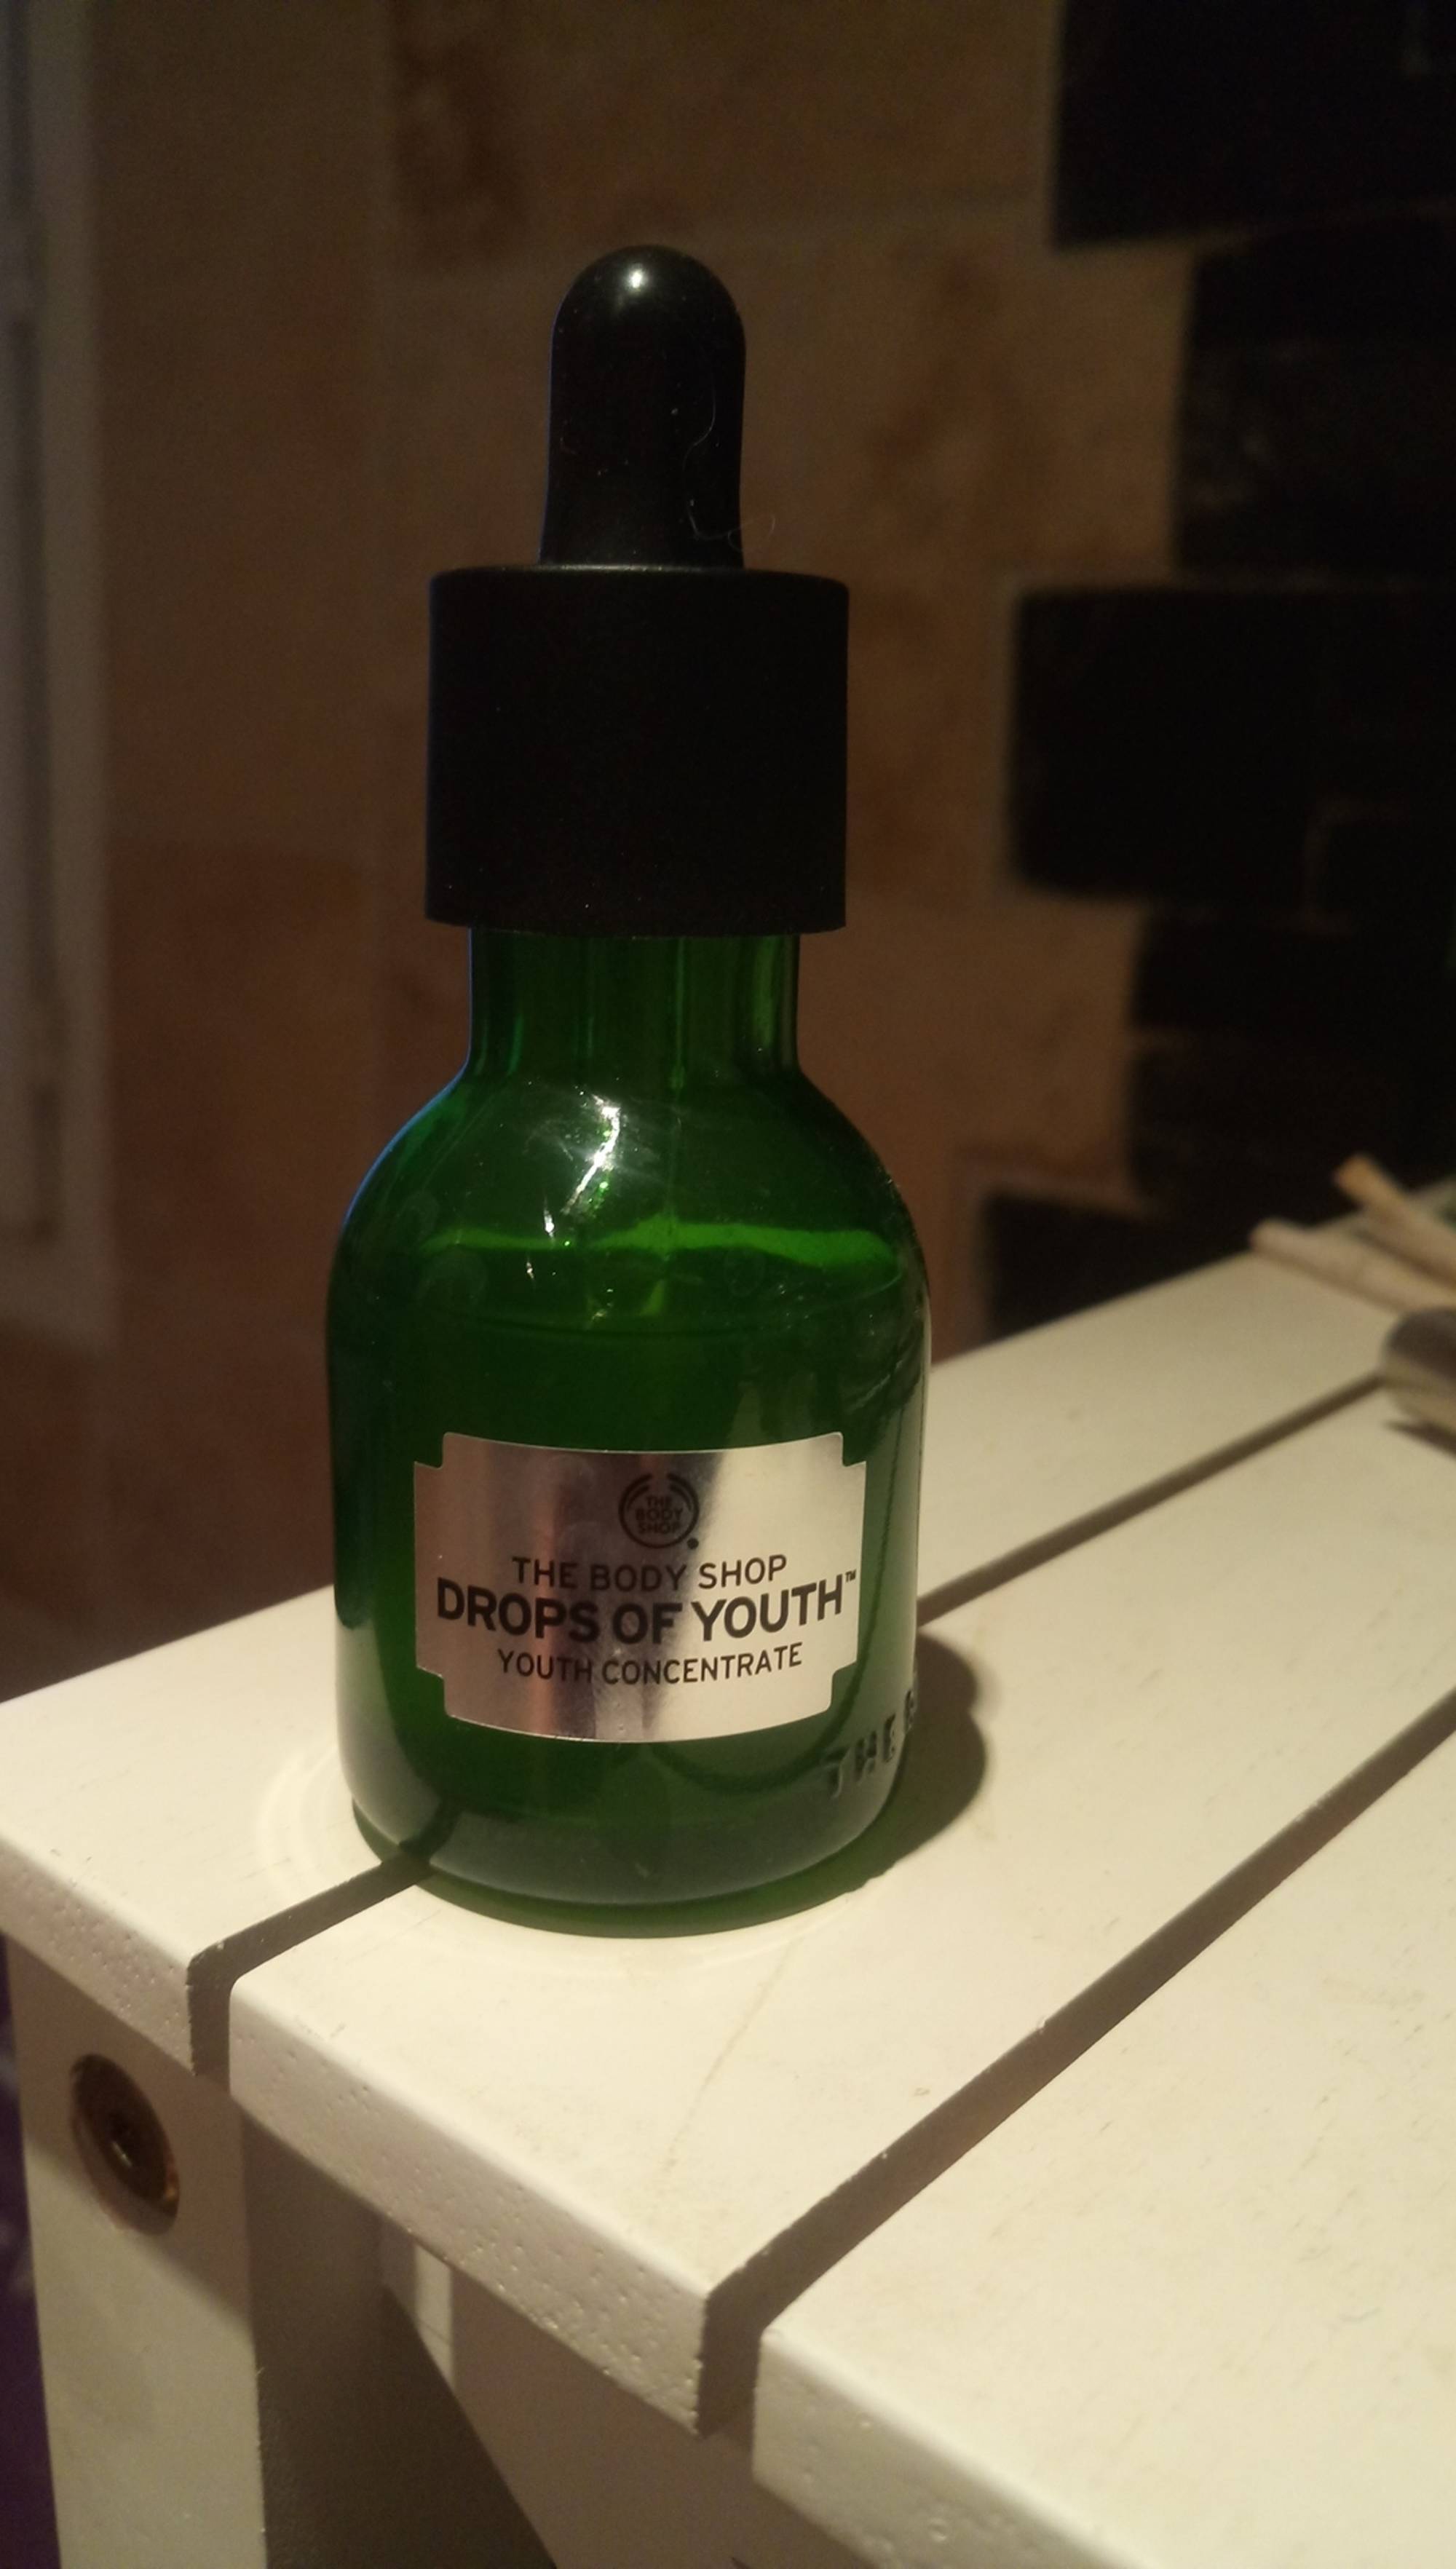 THE BODY SHOP - Drops of youth - Youth concentrate